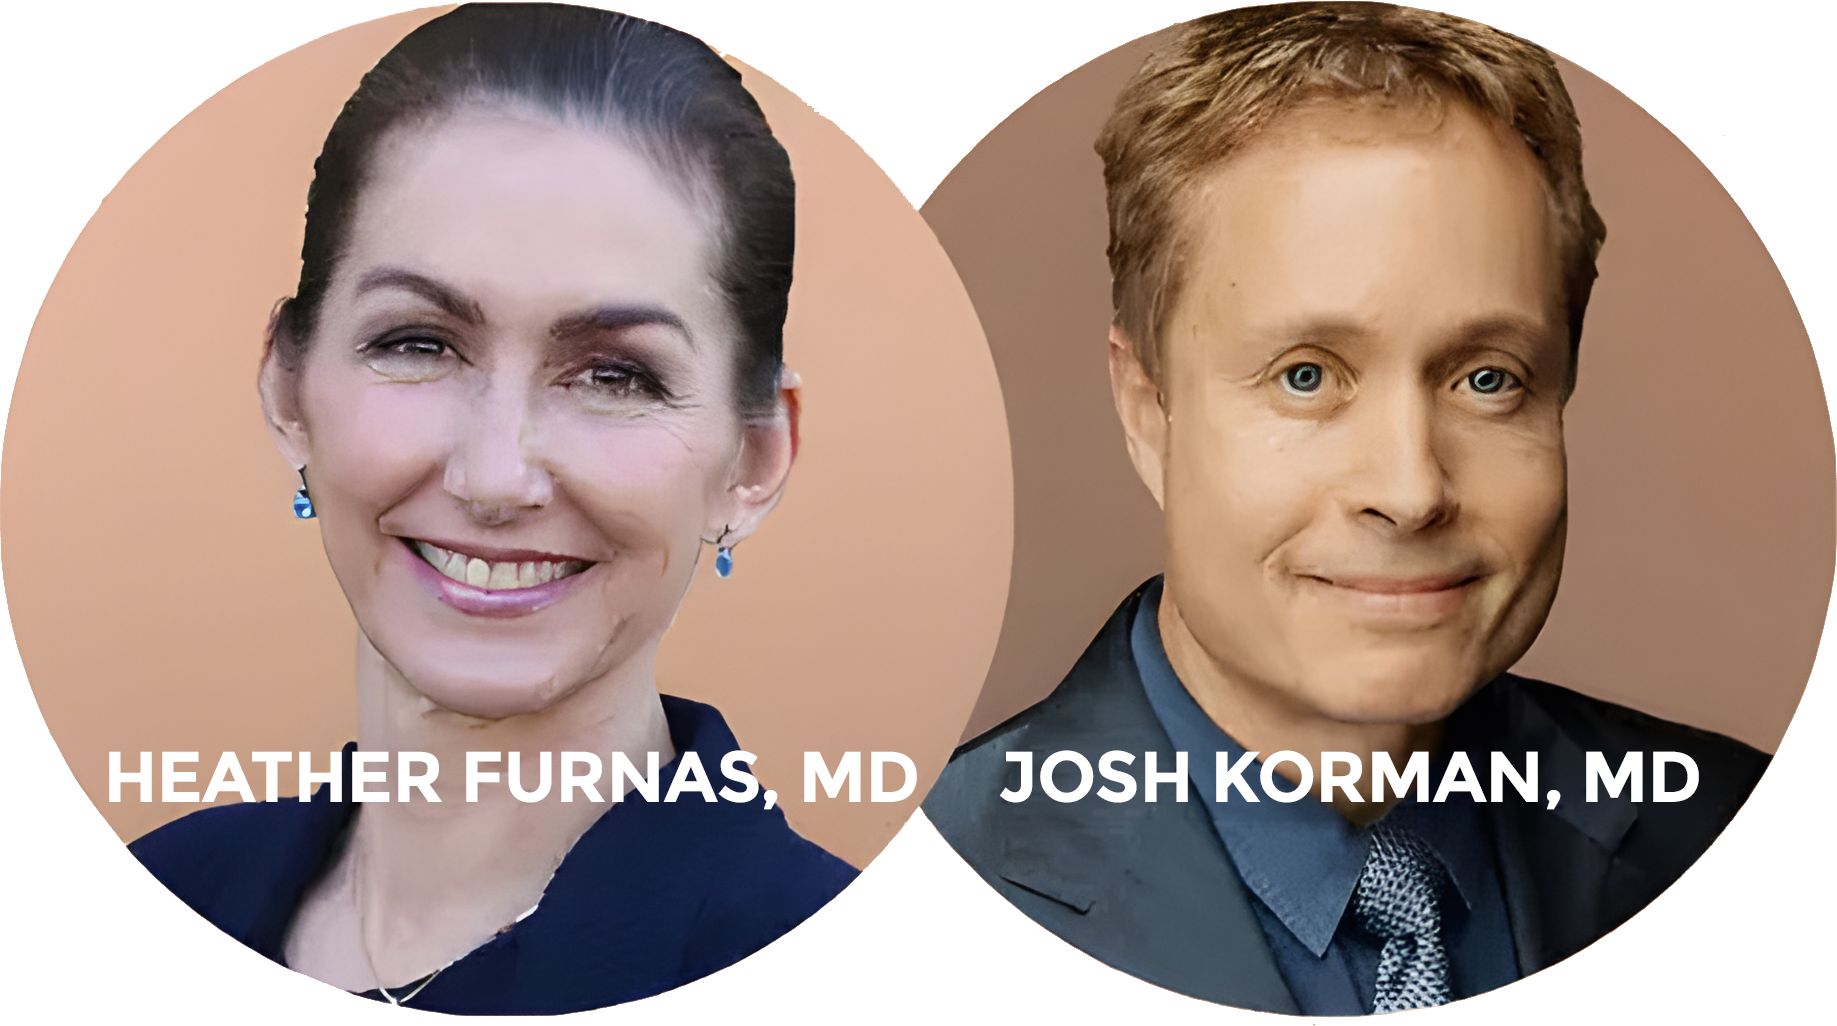 Dr. Furnhas & Dr. Korman on the SkinTuition Podcasts